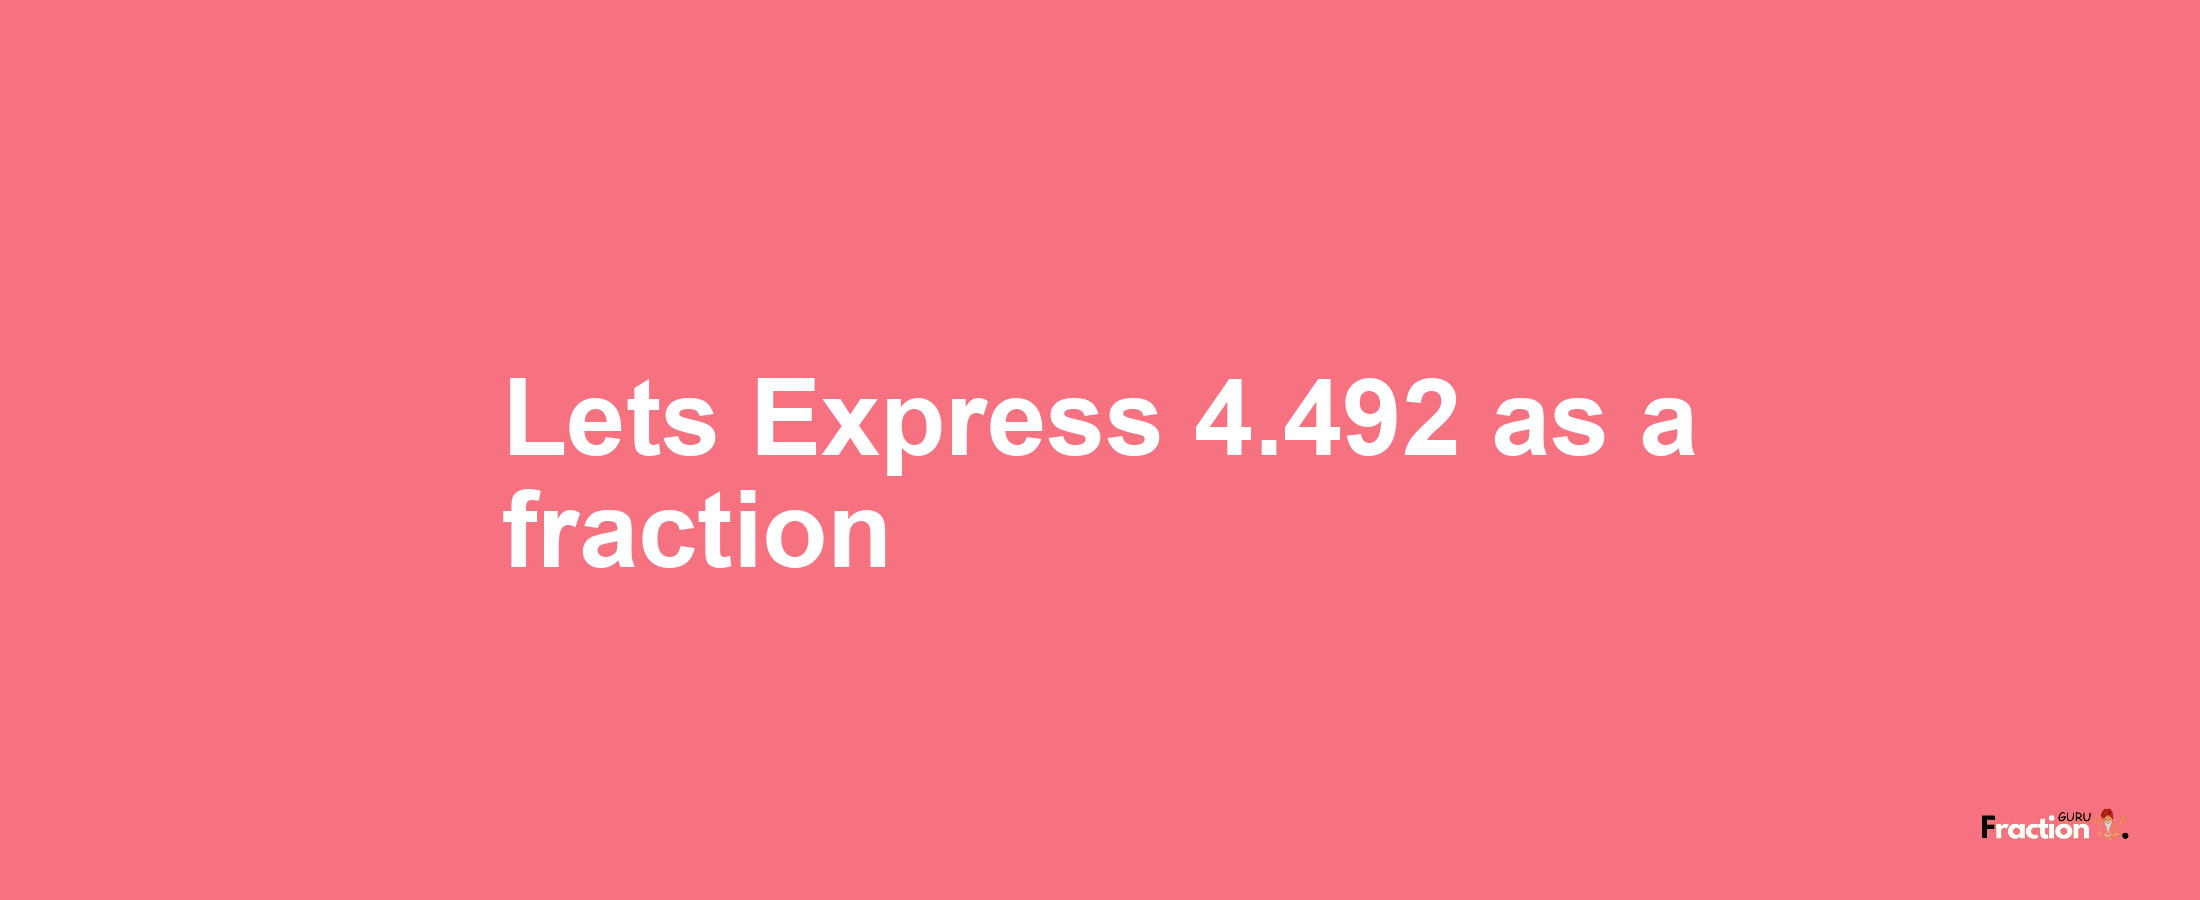 Lets Express 4.492 as afraction